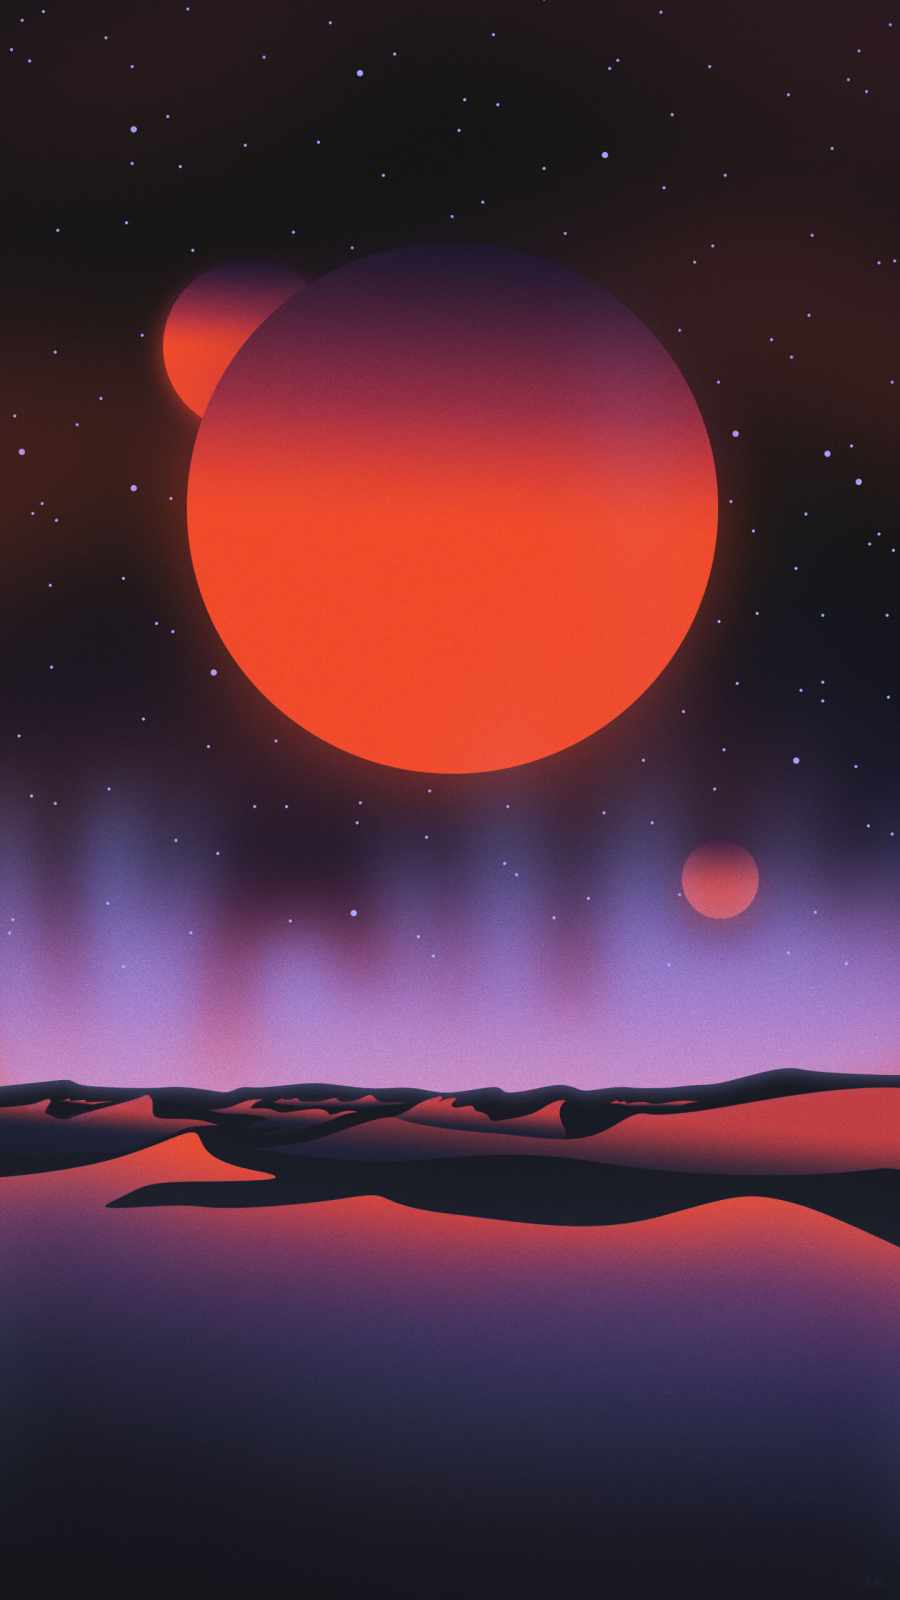 A iphone wallpaper version of the newly released Dune image  rdune